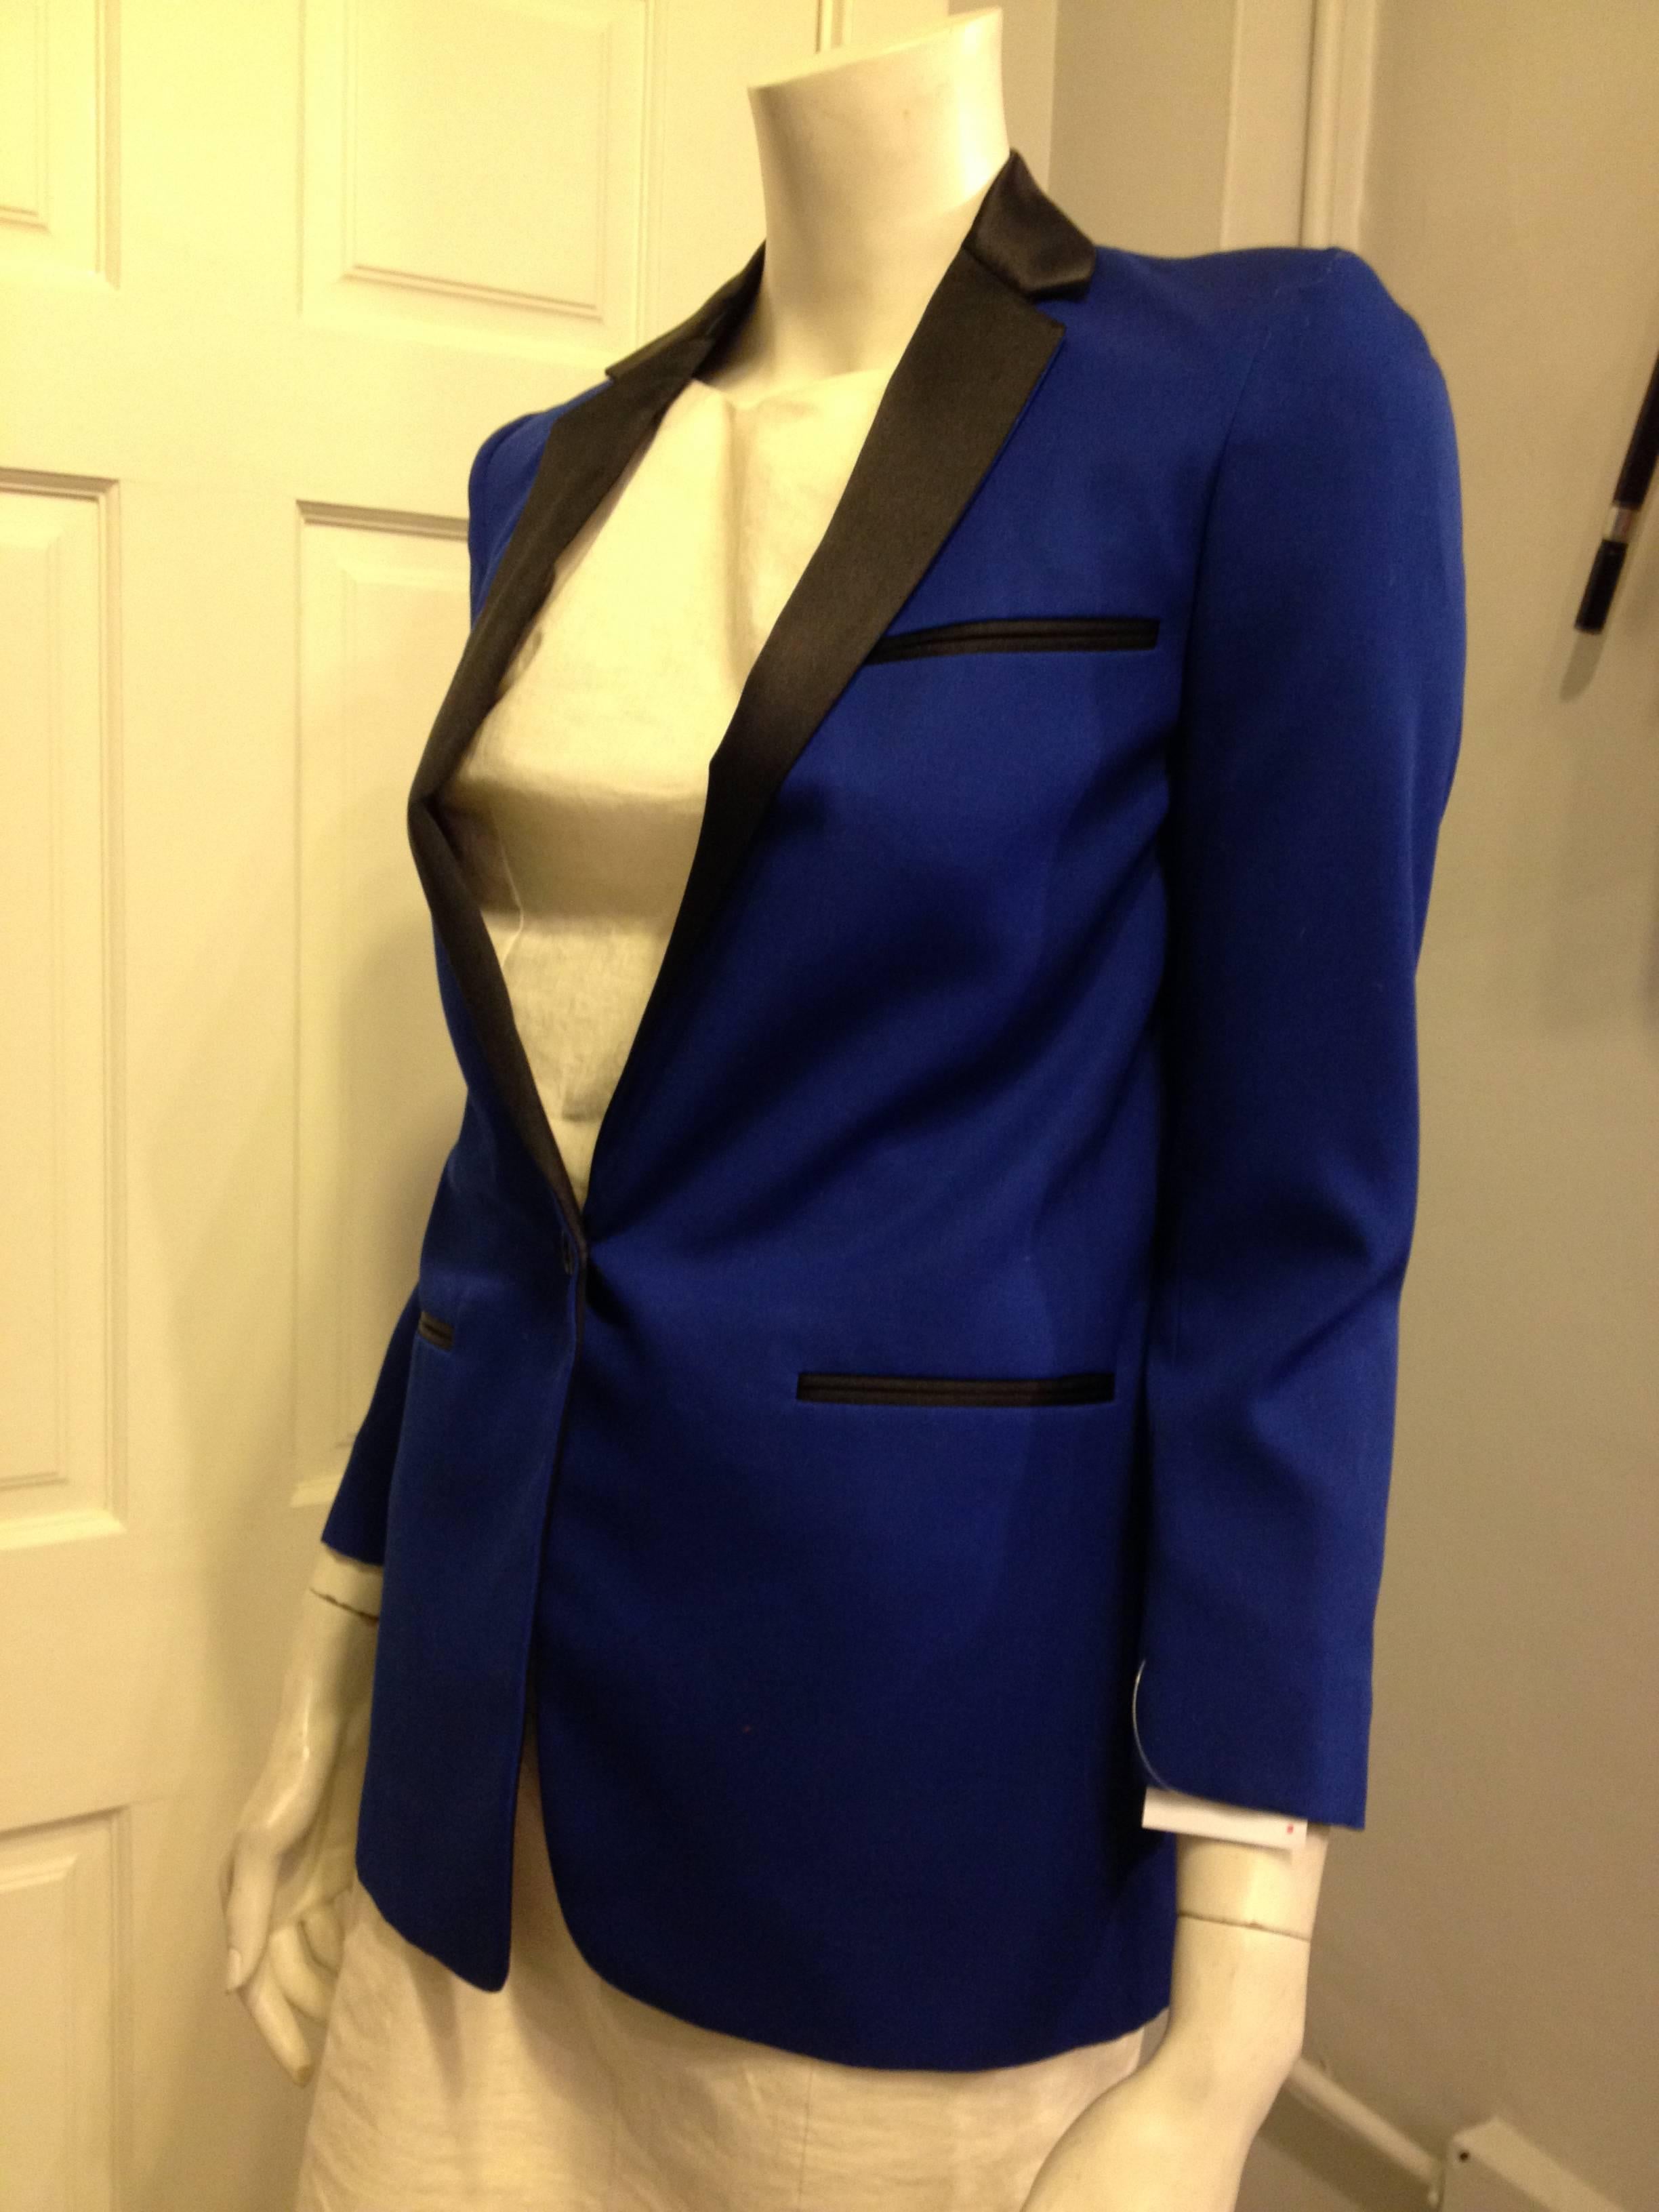 How modern. This Celine blazer has such an impeccable cut and fit, and it pops even more in the gorgeous royal blue color. The single button closure nips in the waist, while the relatively straight cut keeps the piece contemporary. The glossy black